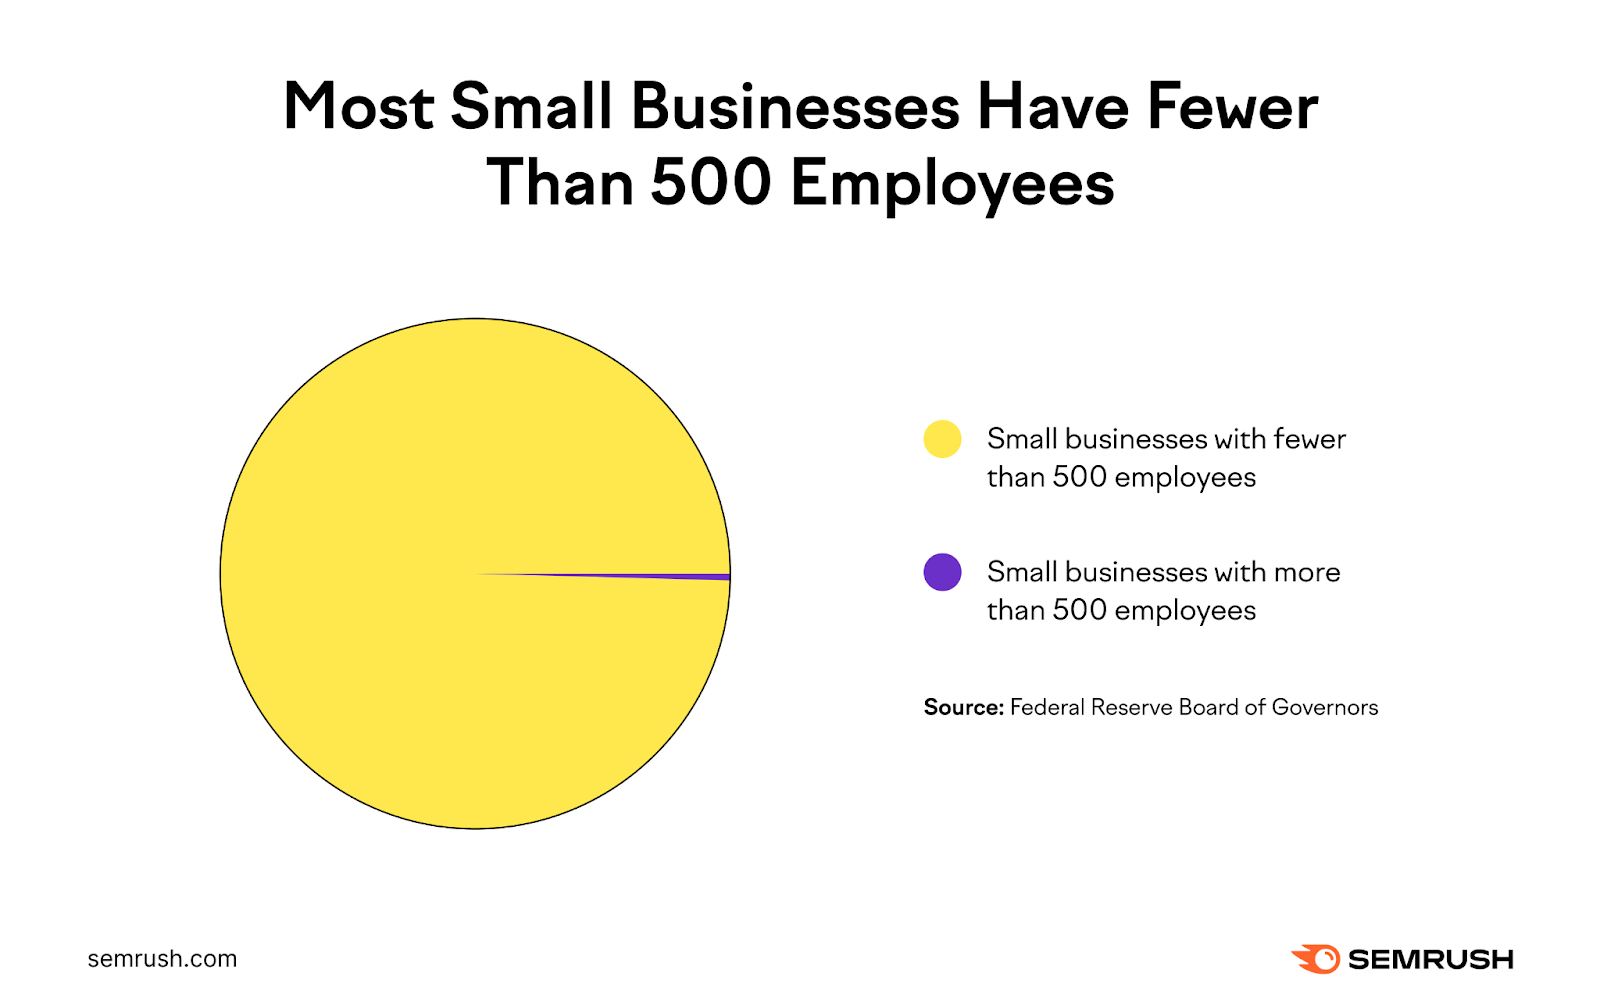 Most small businesses have fewer than 500 employees